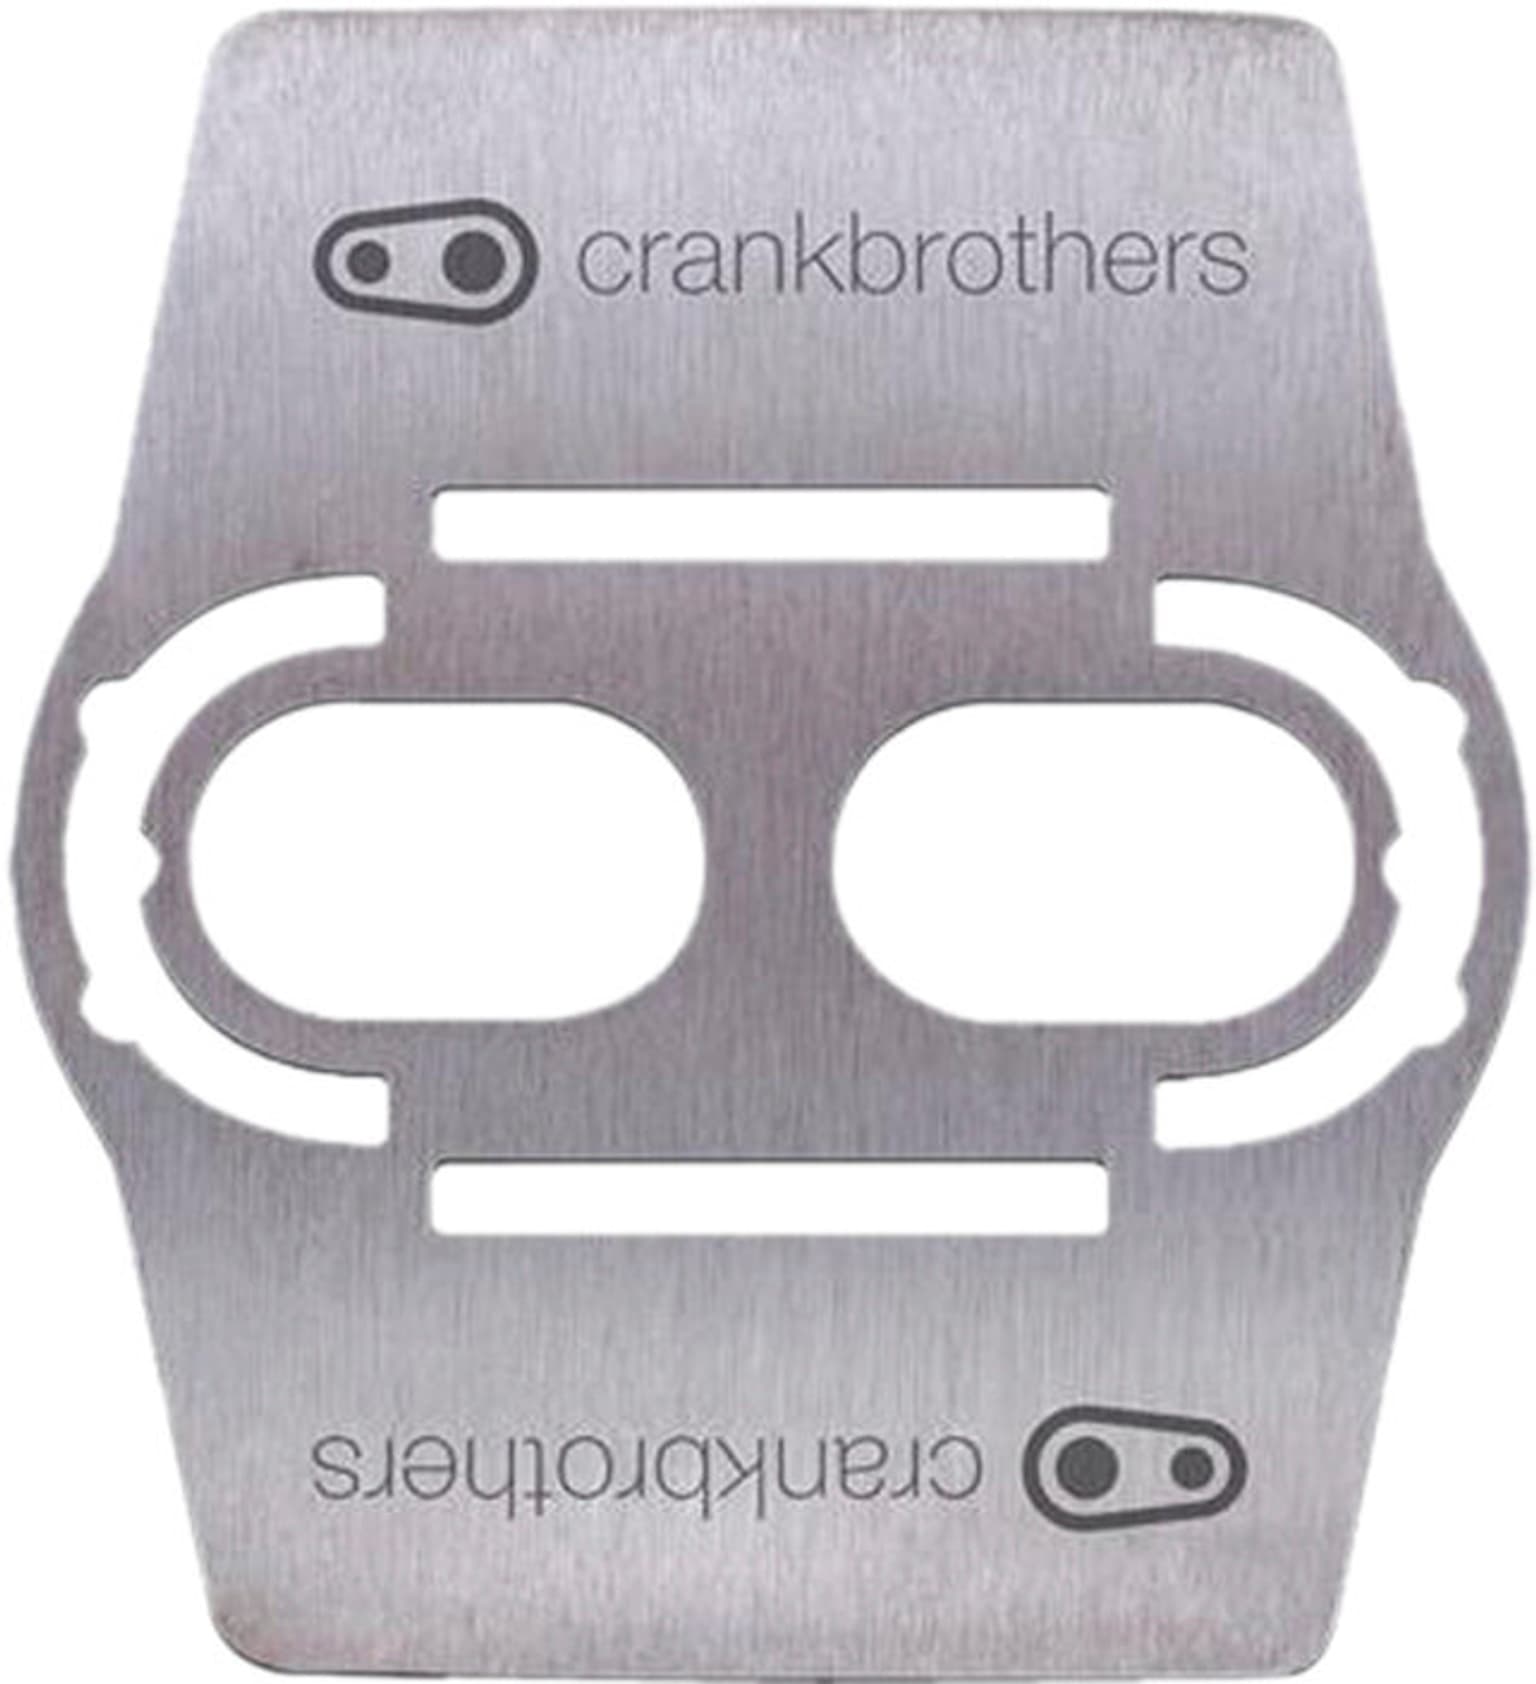 crankbrothers crankbrothers Shoe Shield Pedale 1